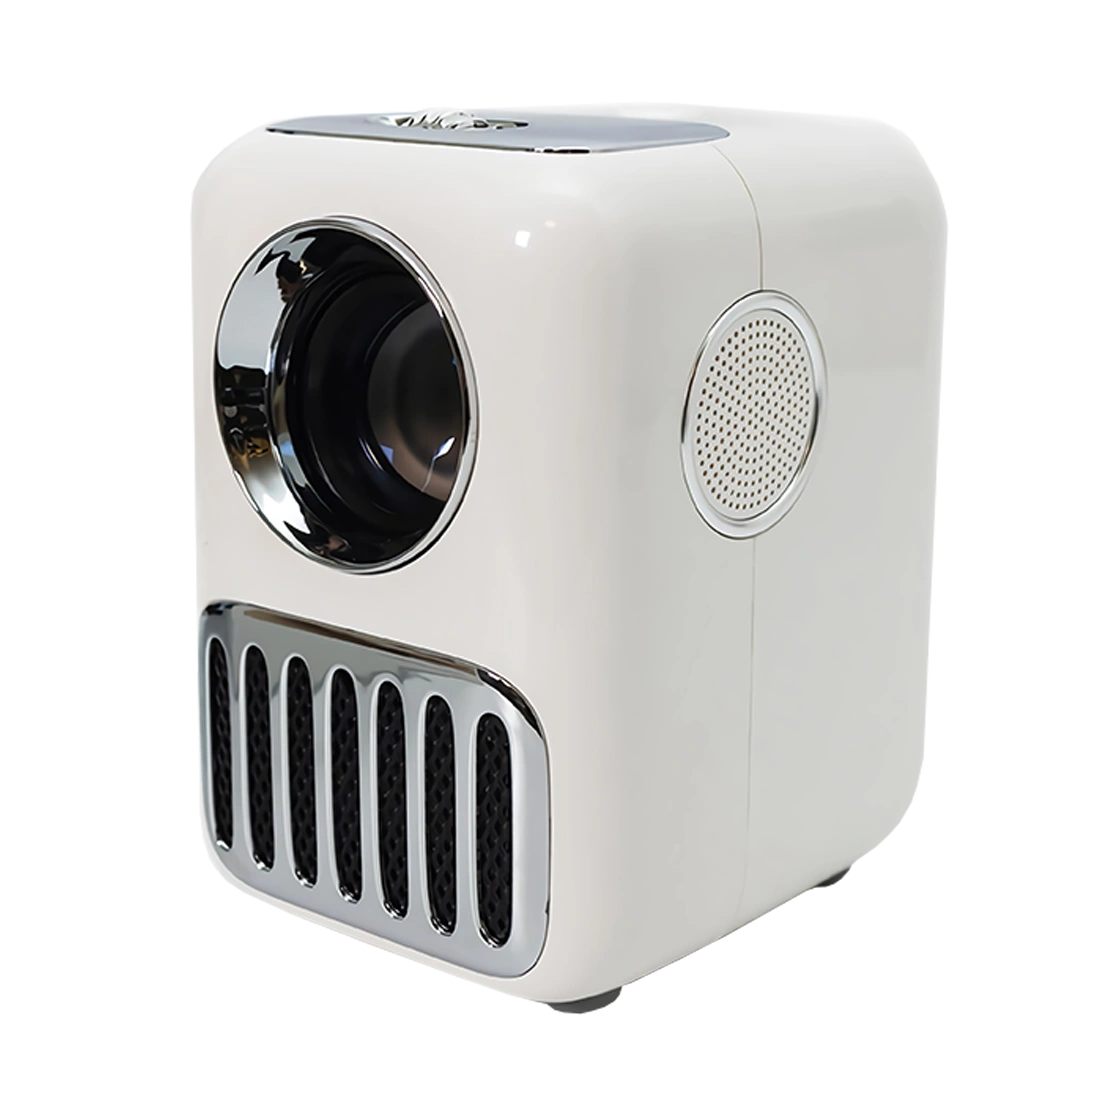 Wanbo Portable Video Projector T2R Max